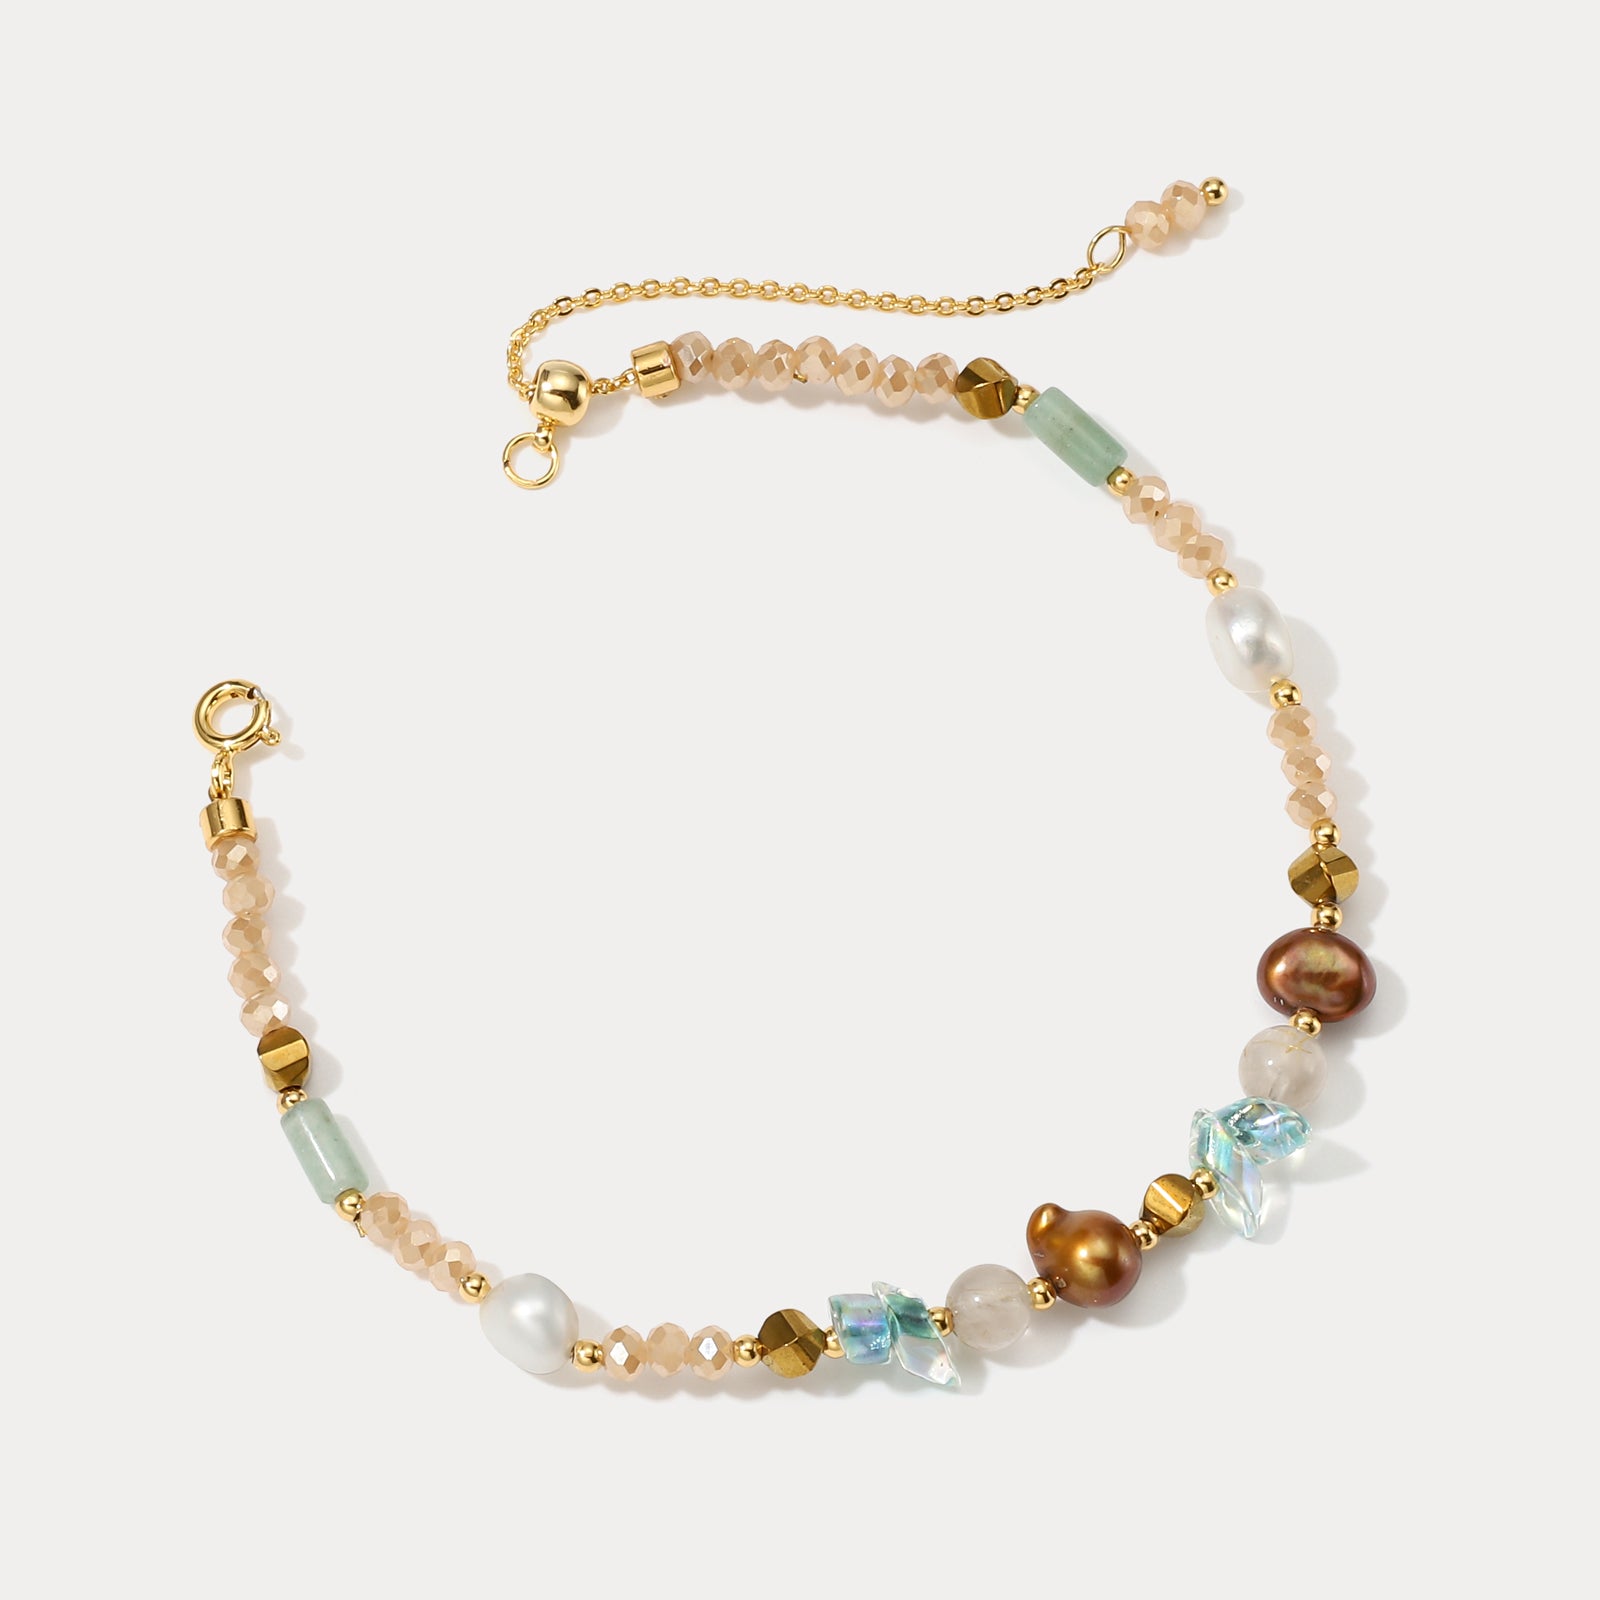 Colorful Natural Stone Beaded Bracelet